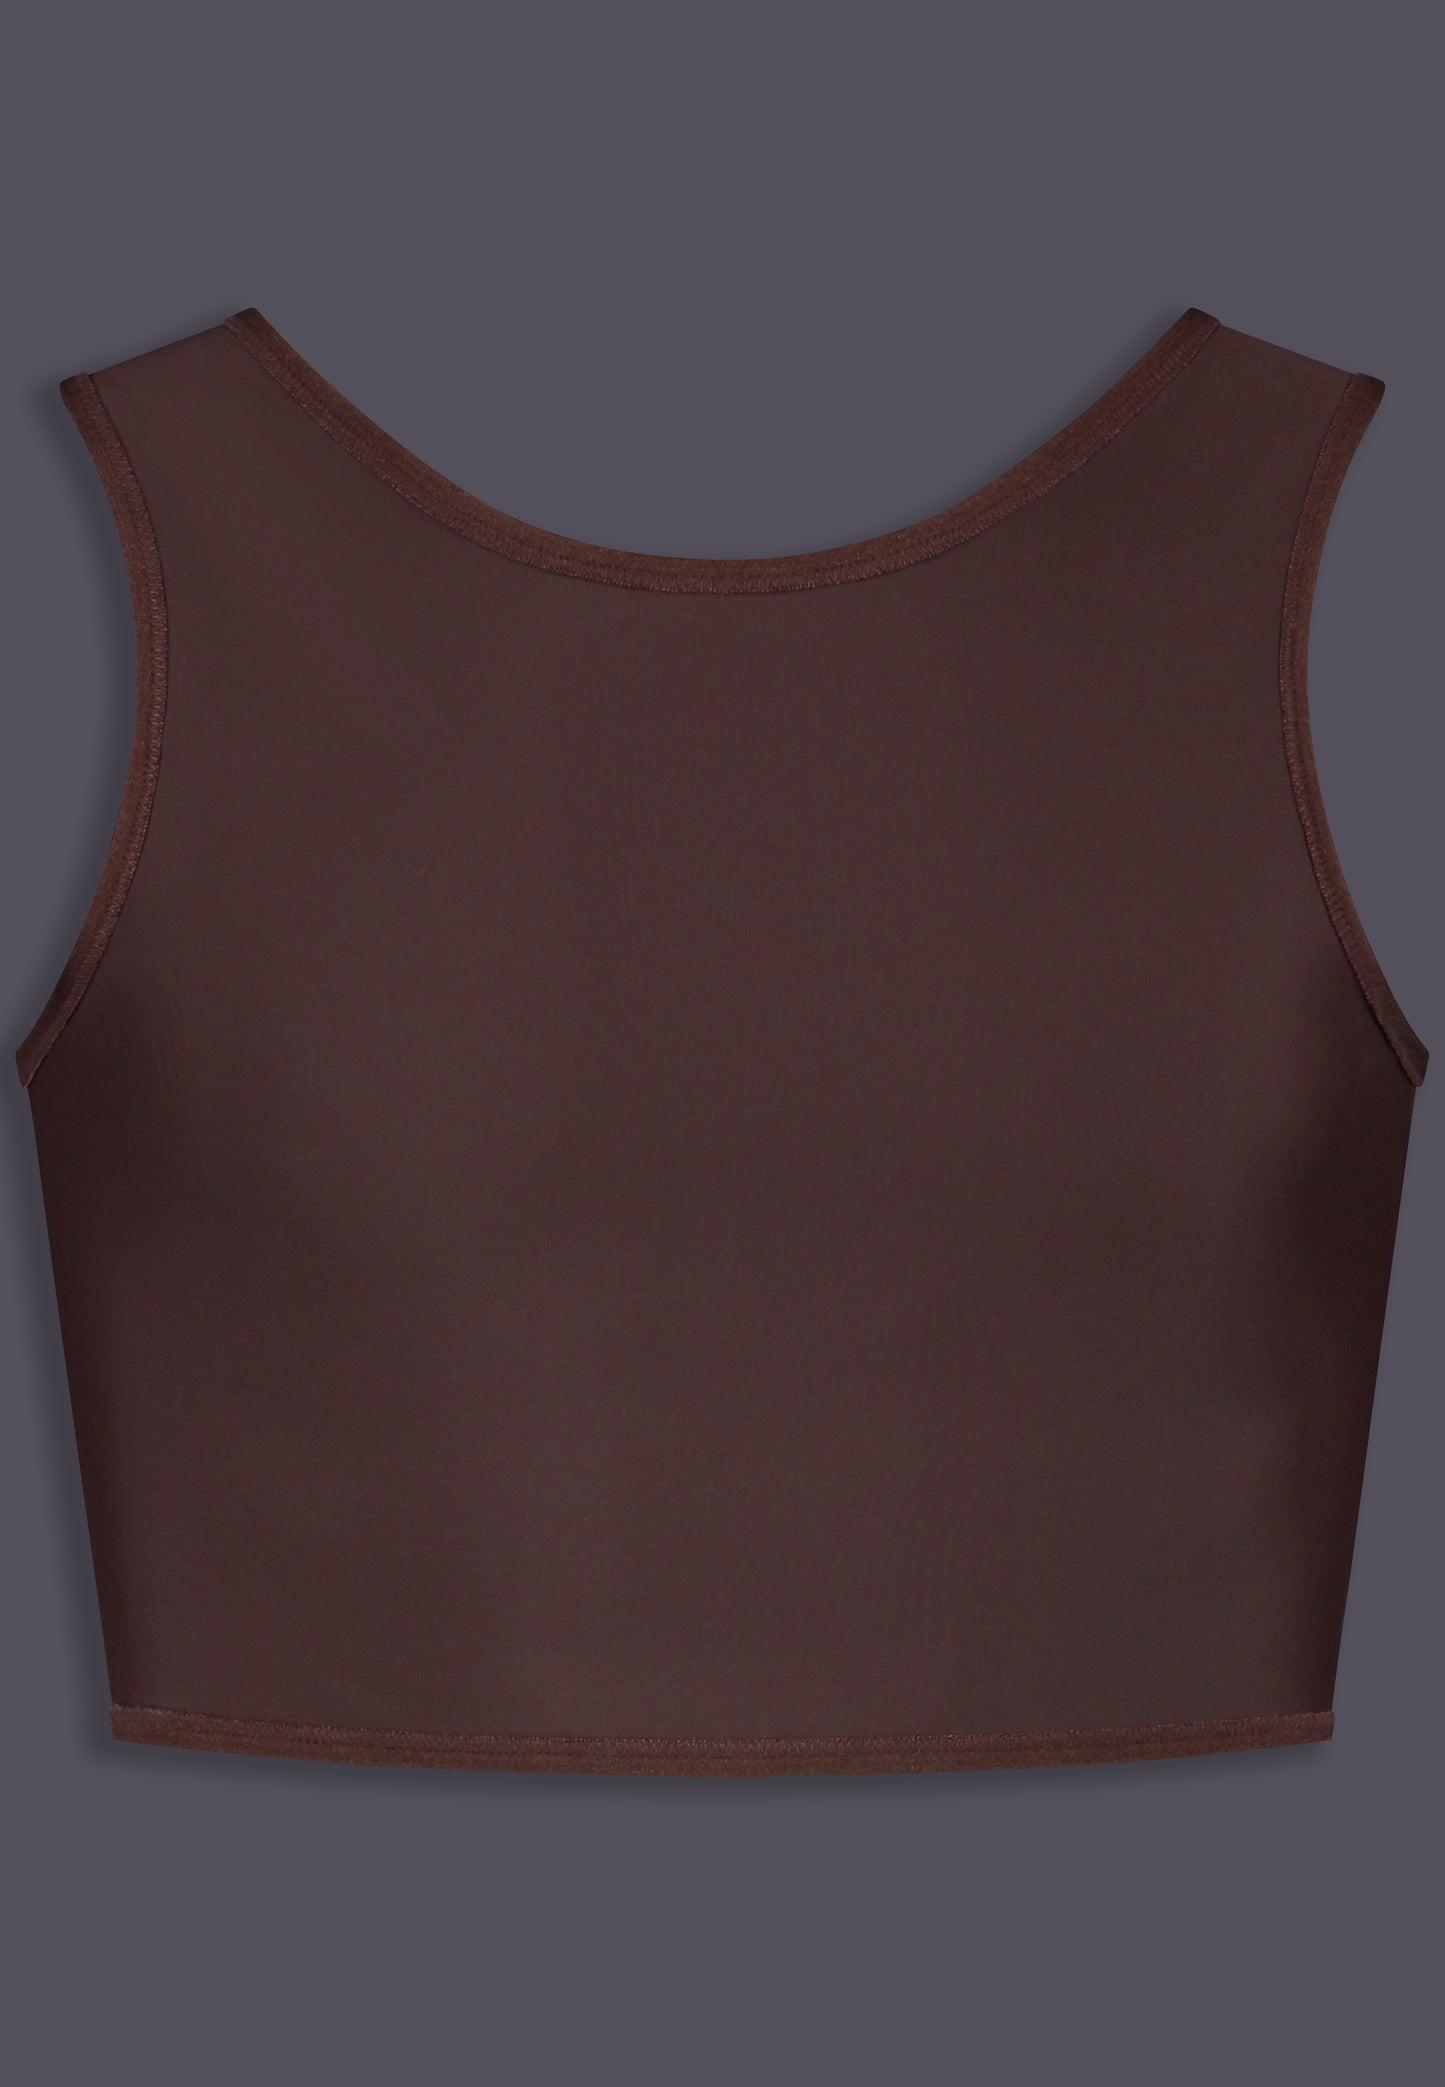 Short Binder extra strong brown front view